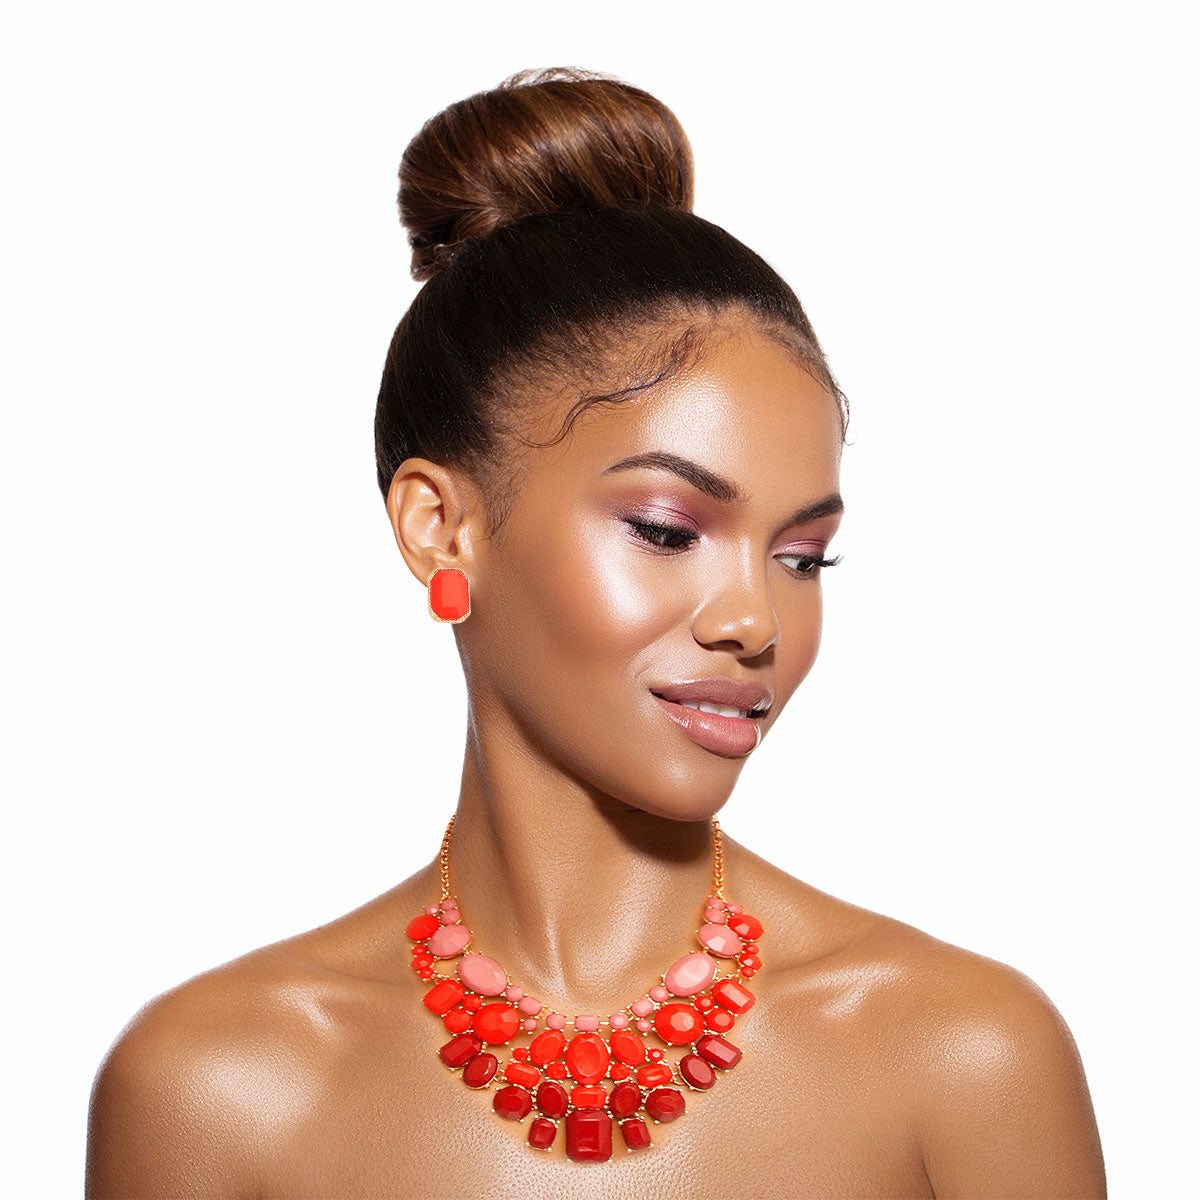 Shades of Red Statement Necklace Set